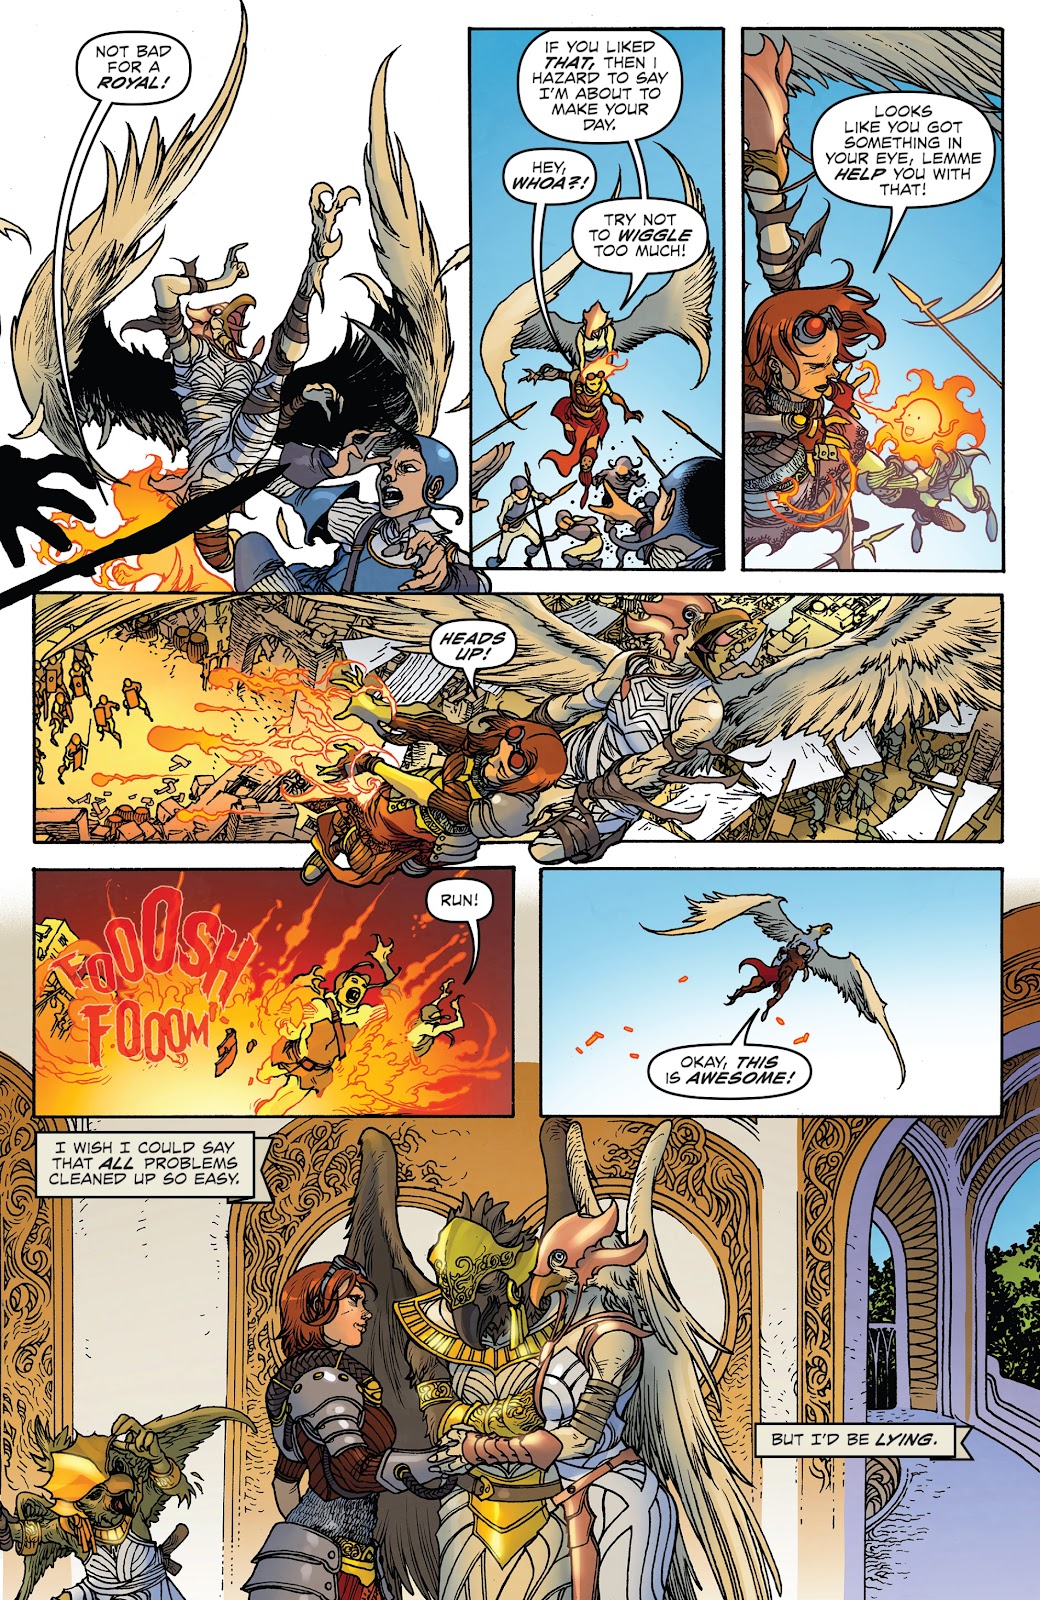 Magic: The Gathering: Chandra issue 2 - Page 10